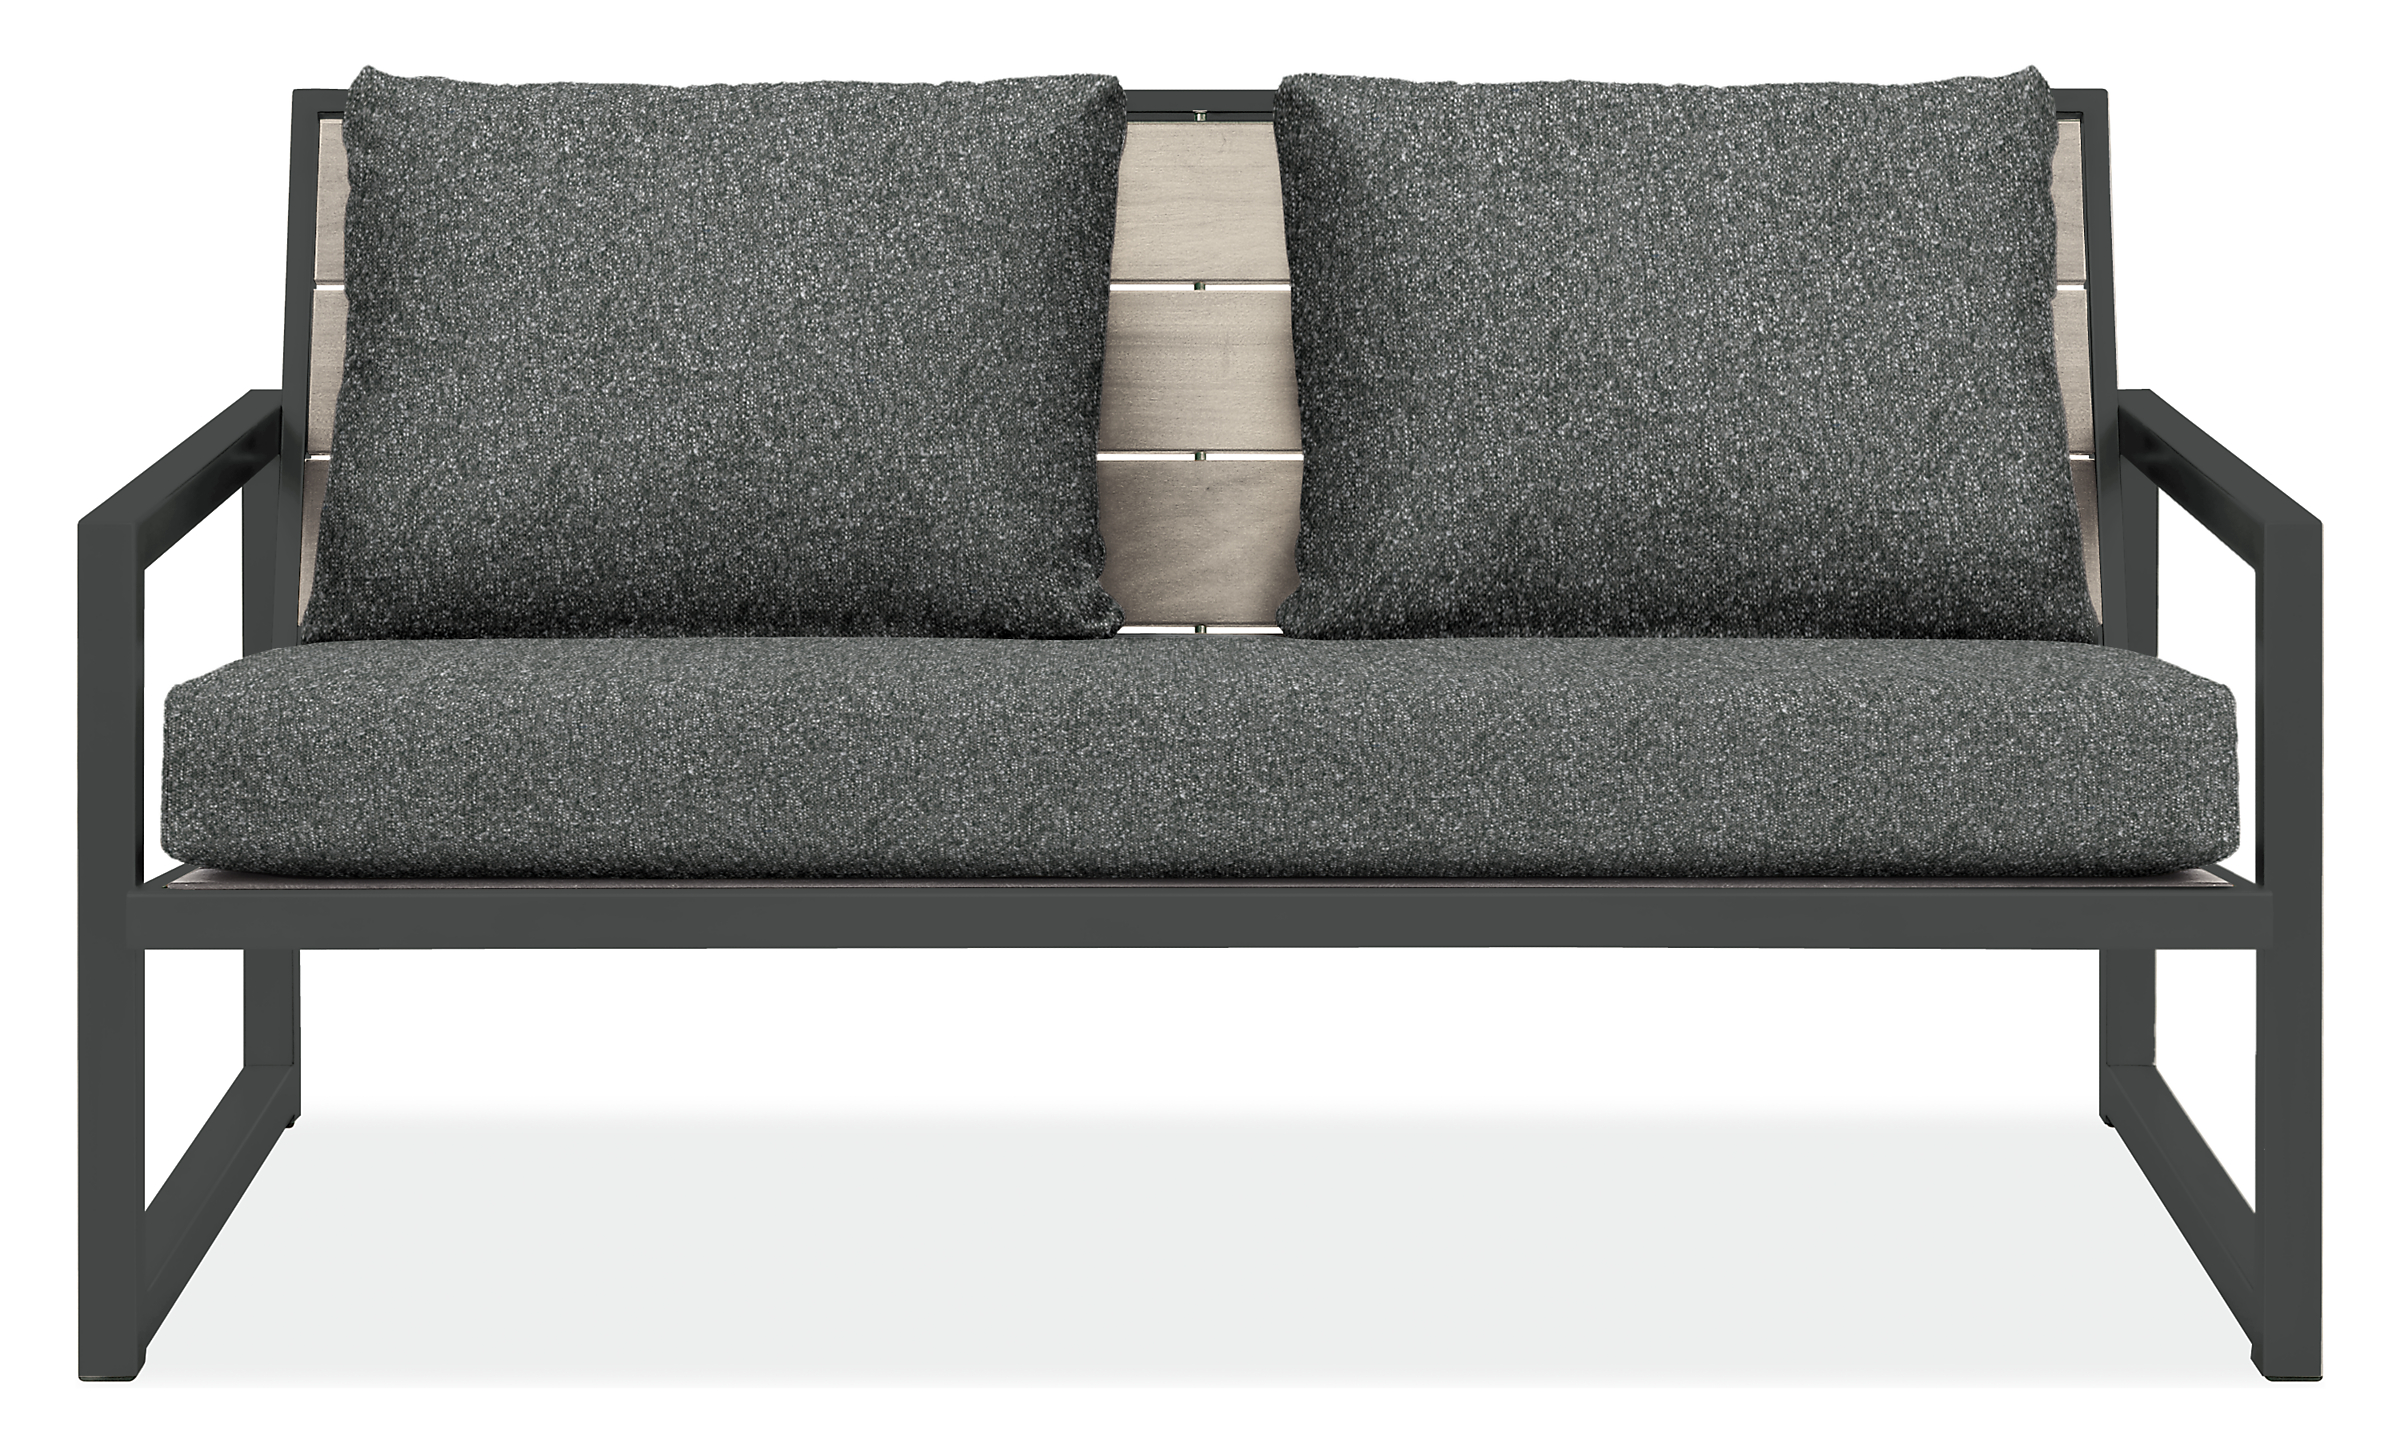 Montego 57" Sofa in Thermally Modified Ash with Cushions